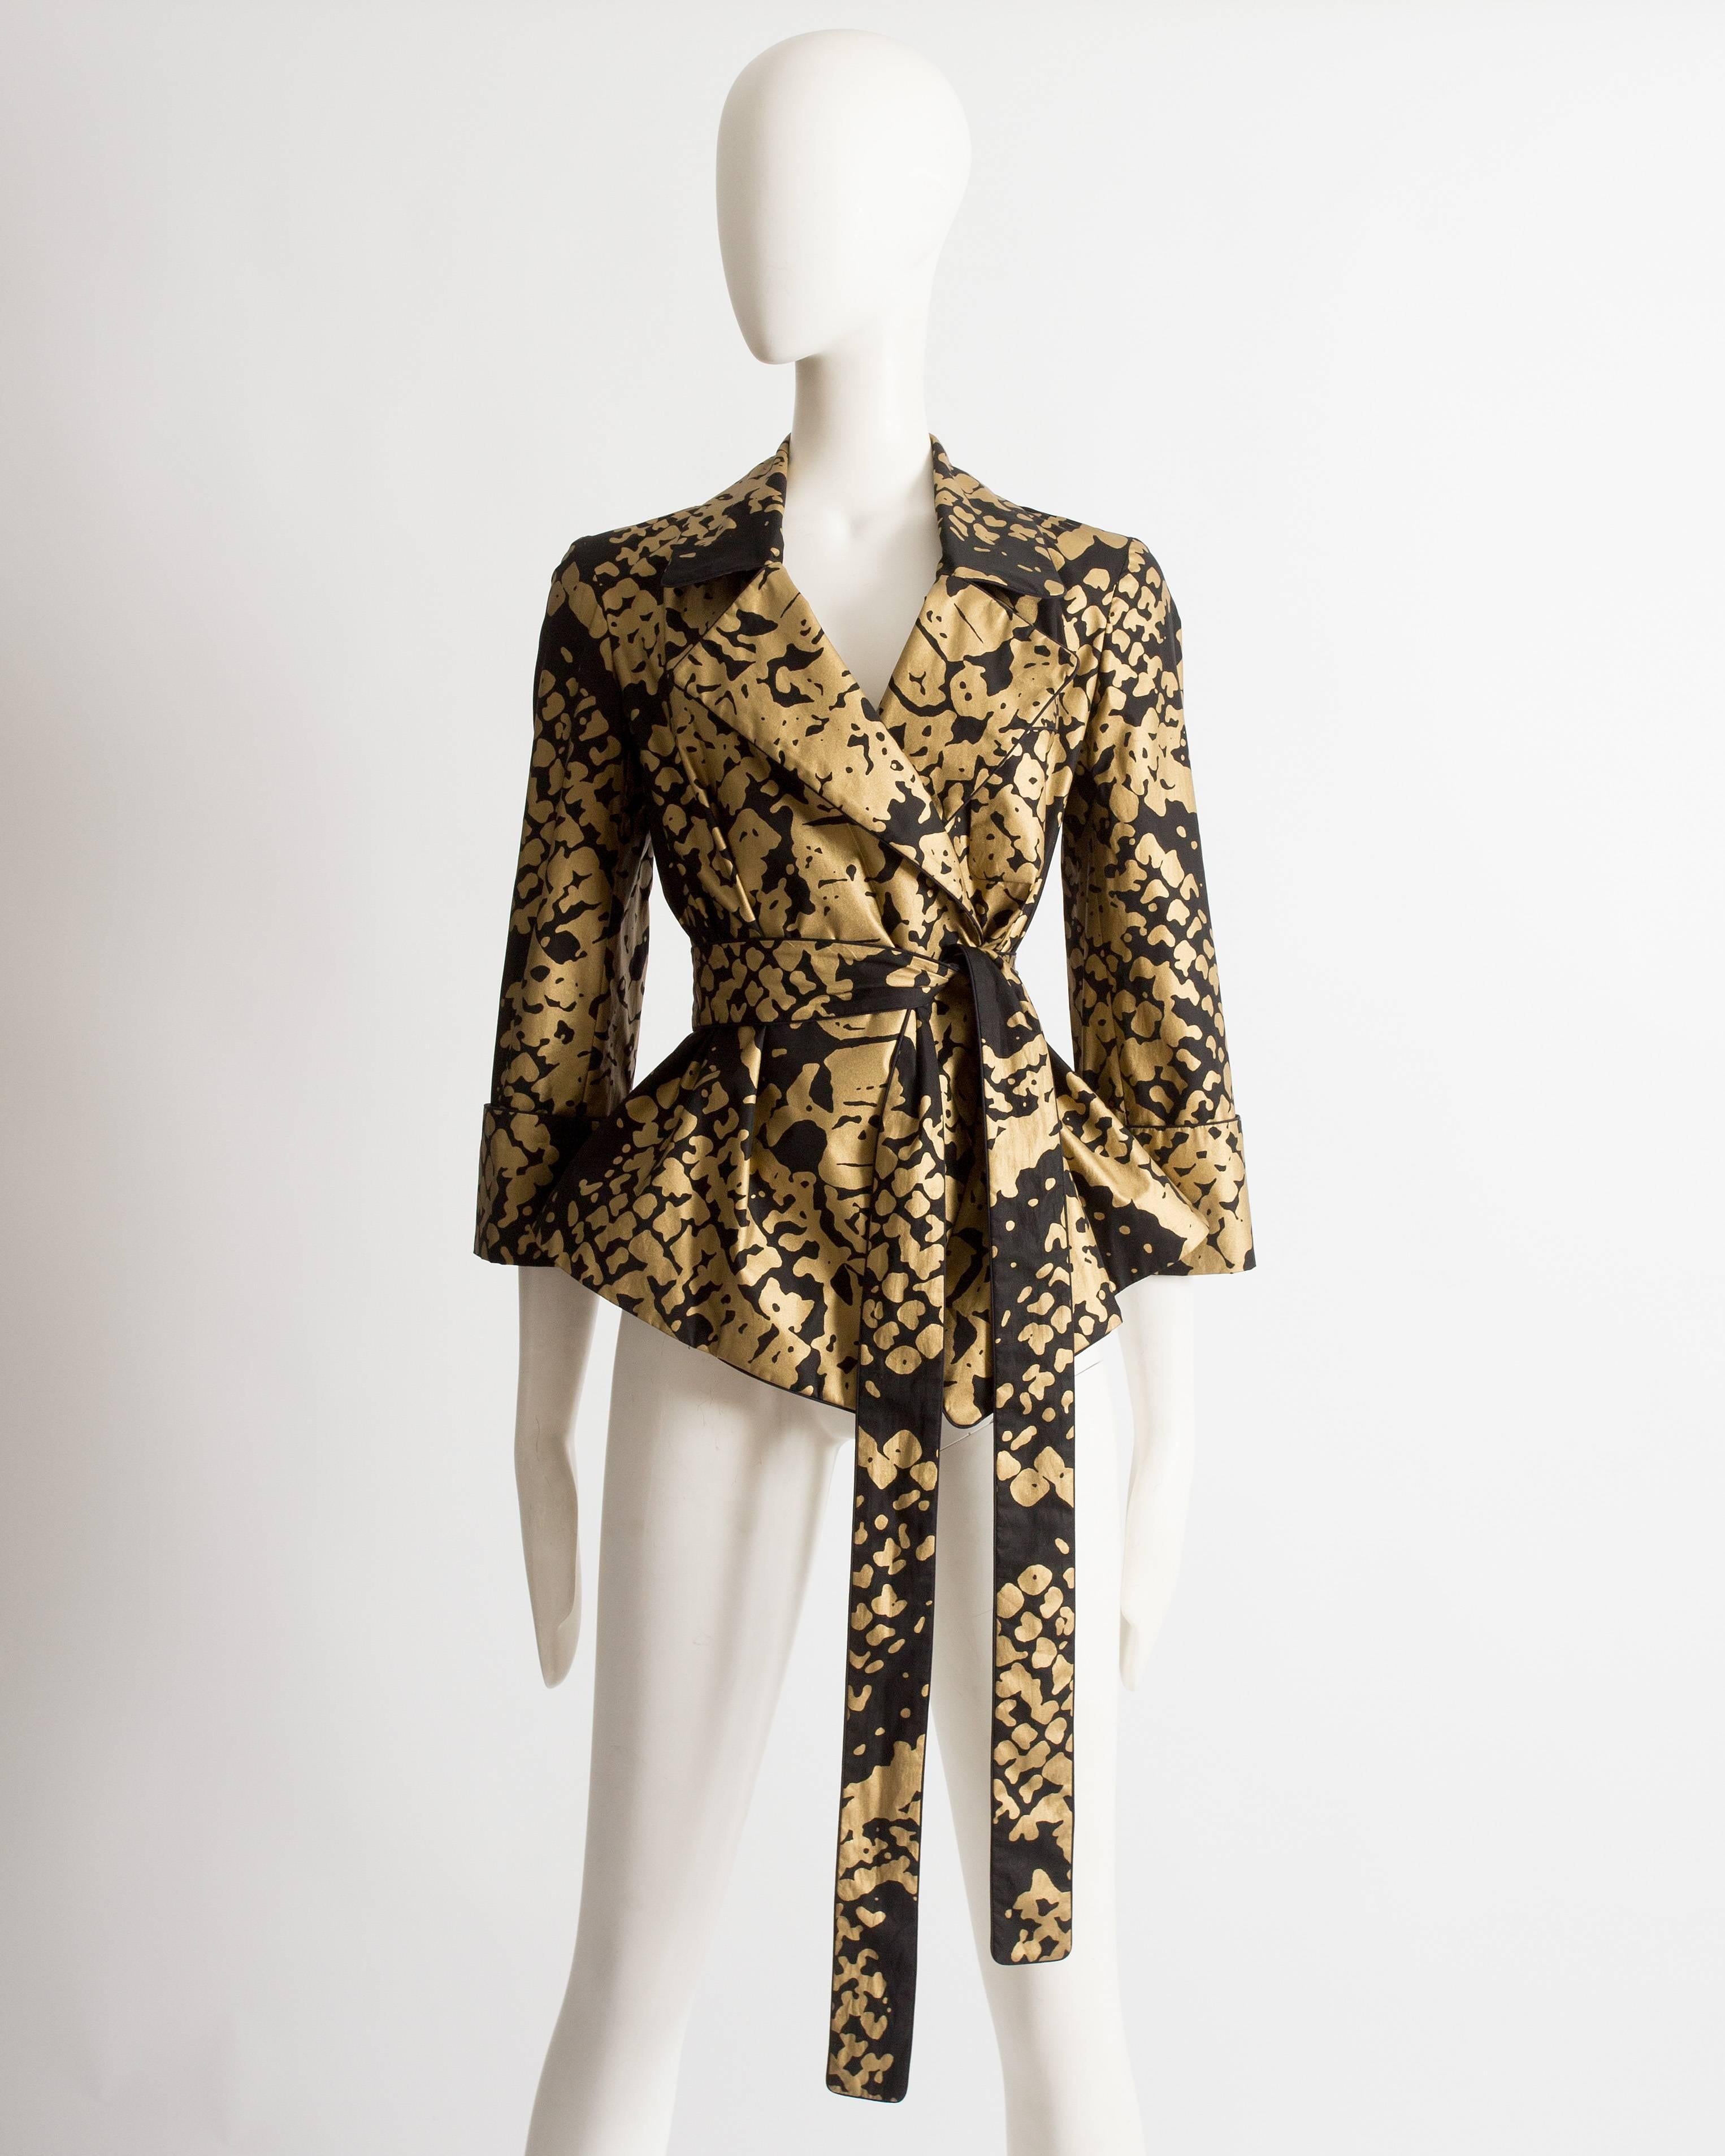 Yves Saint Laurent by Stefano Pilati black evening jacket with gold abstract print and extra long waist belt.

Circa 2008